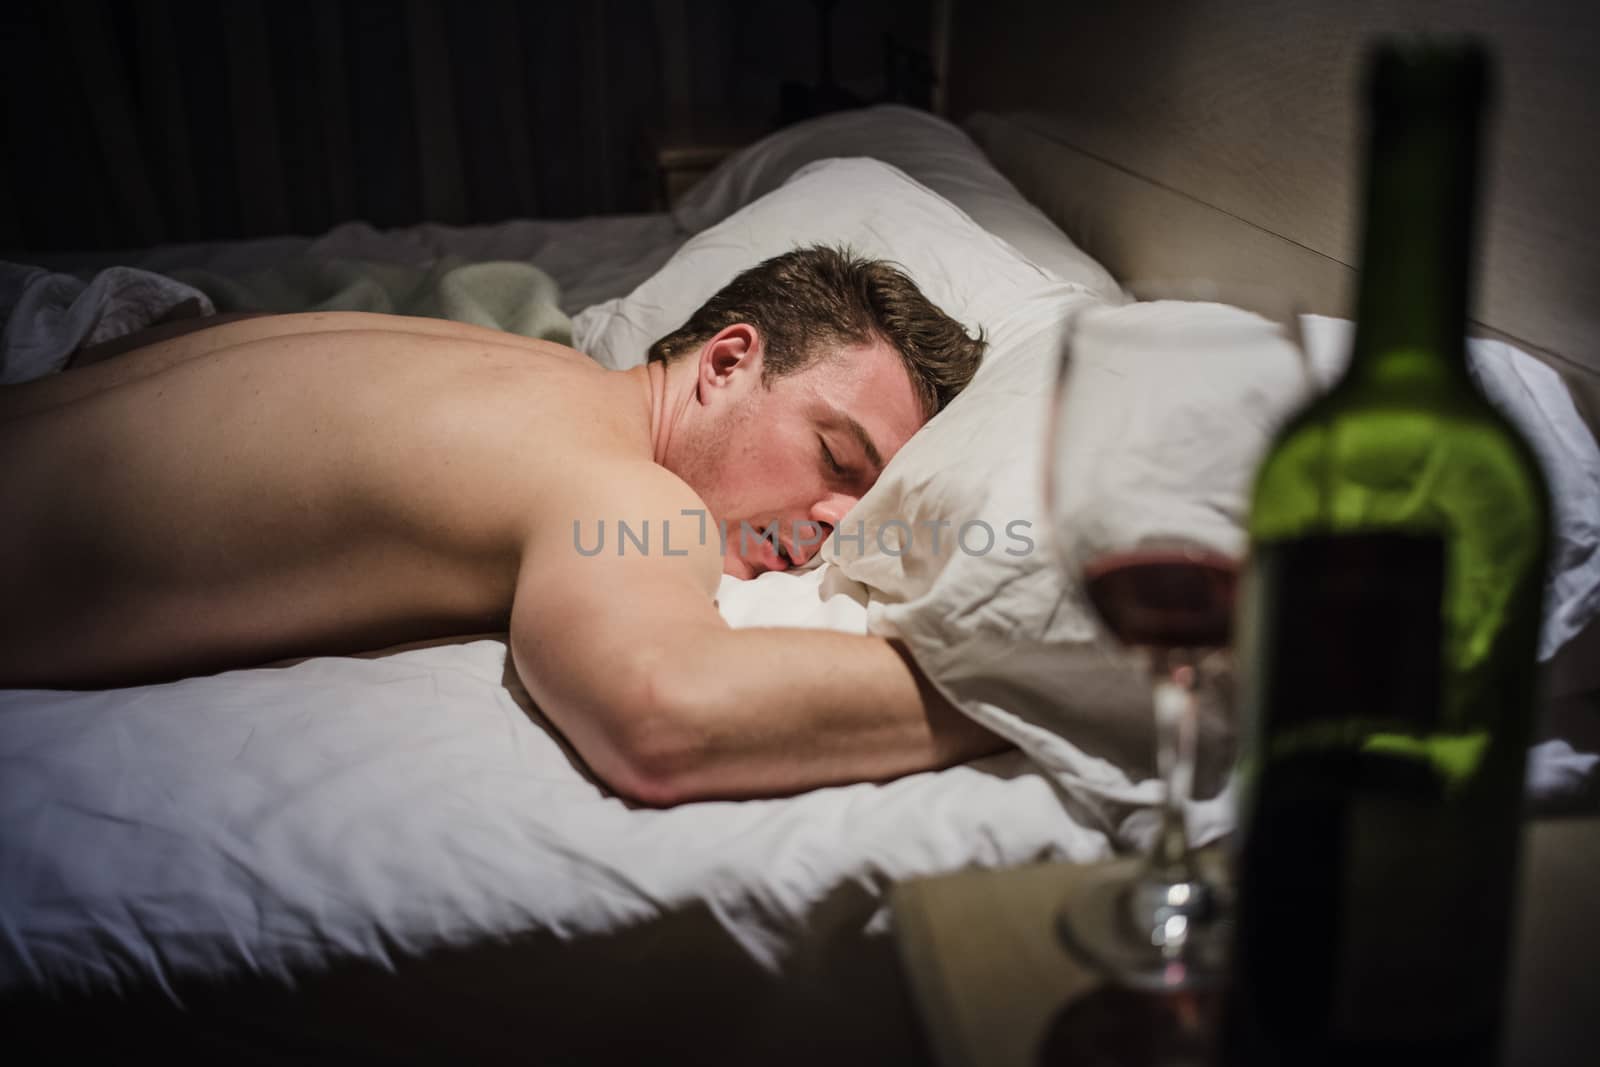 Hangover Man in a Bed at Night with a Wine Bottle